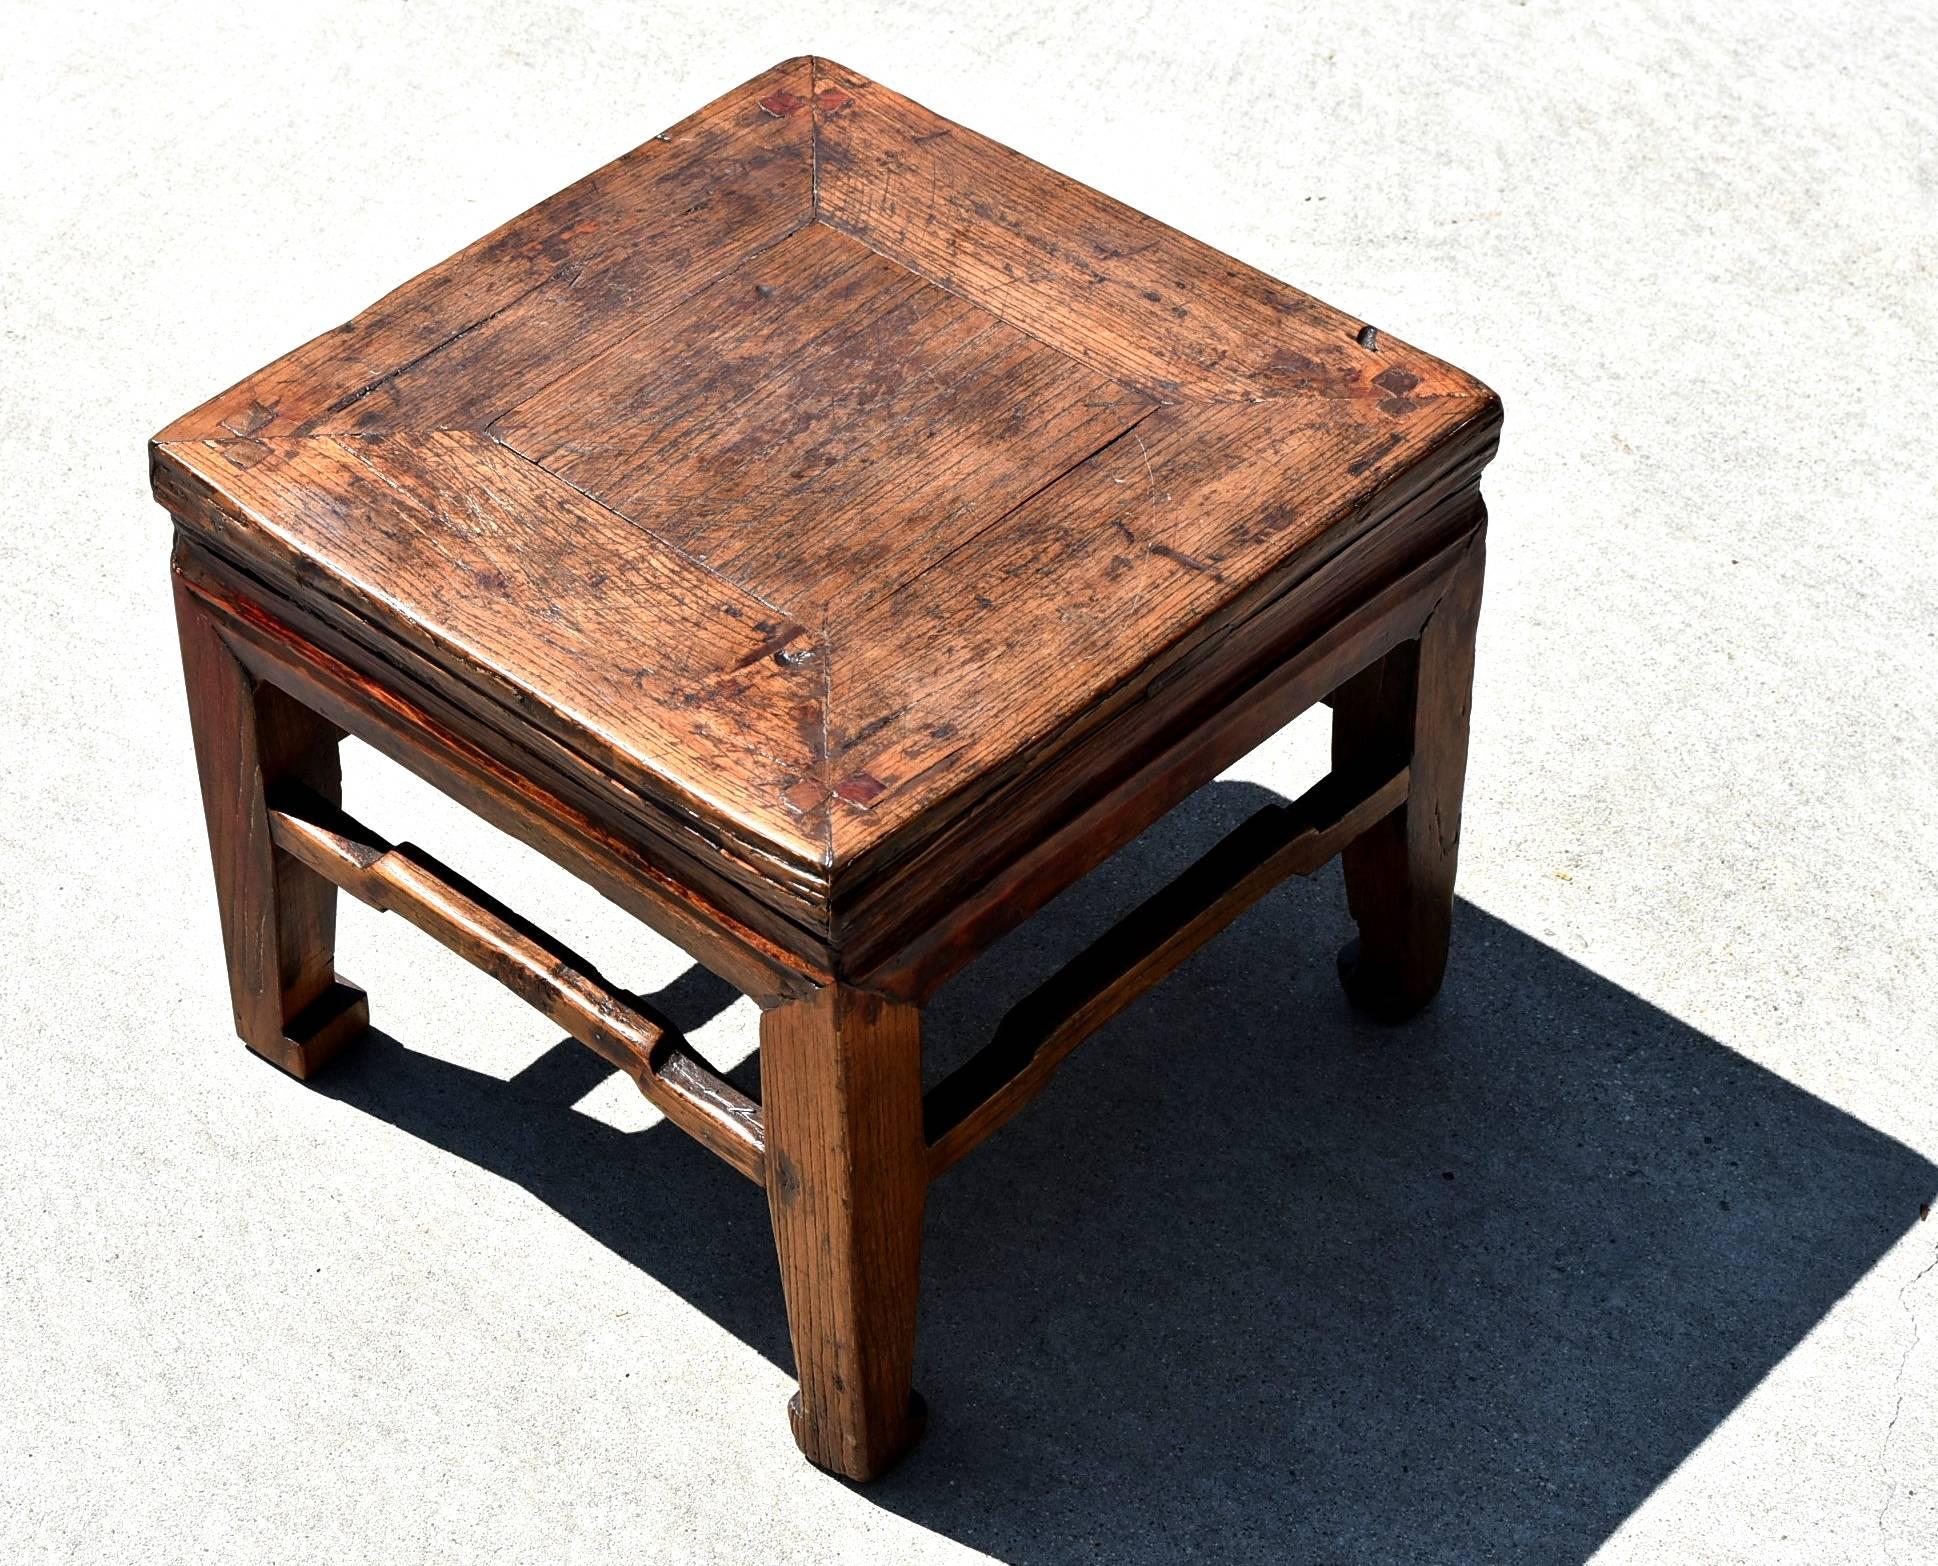 19th Century Square Antique Country Stool, with Hoof Legs